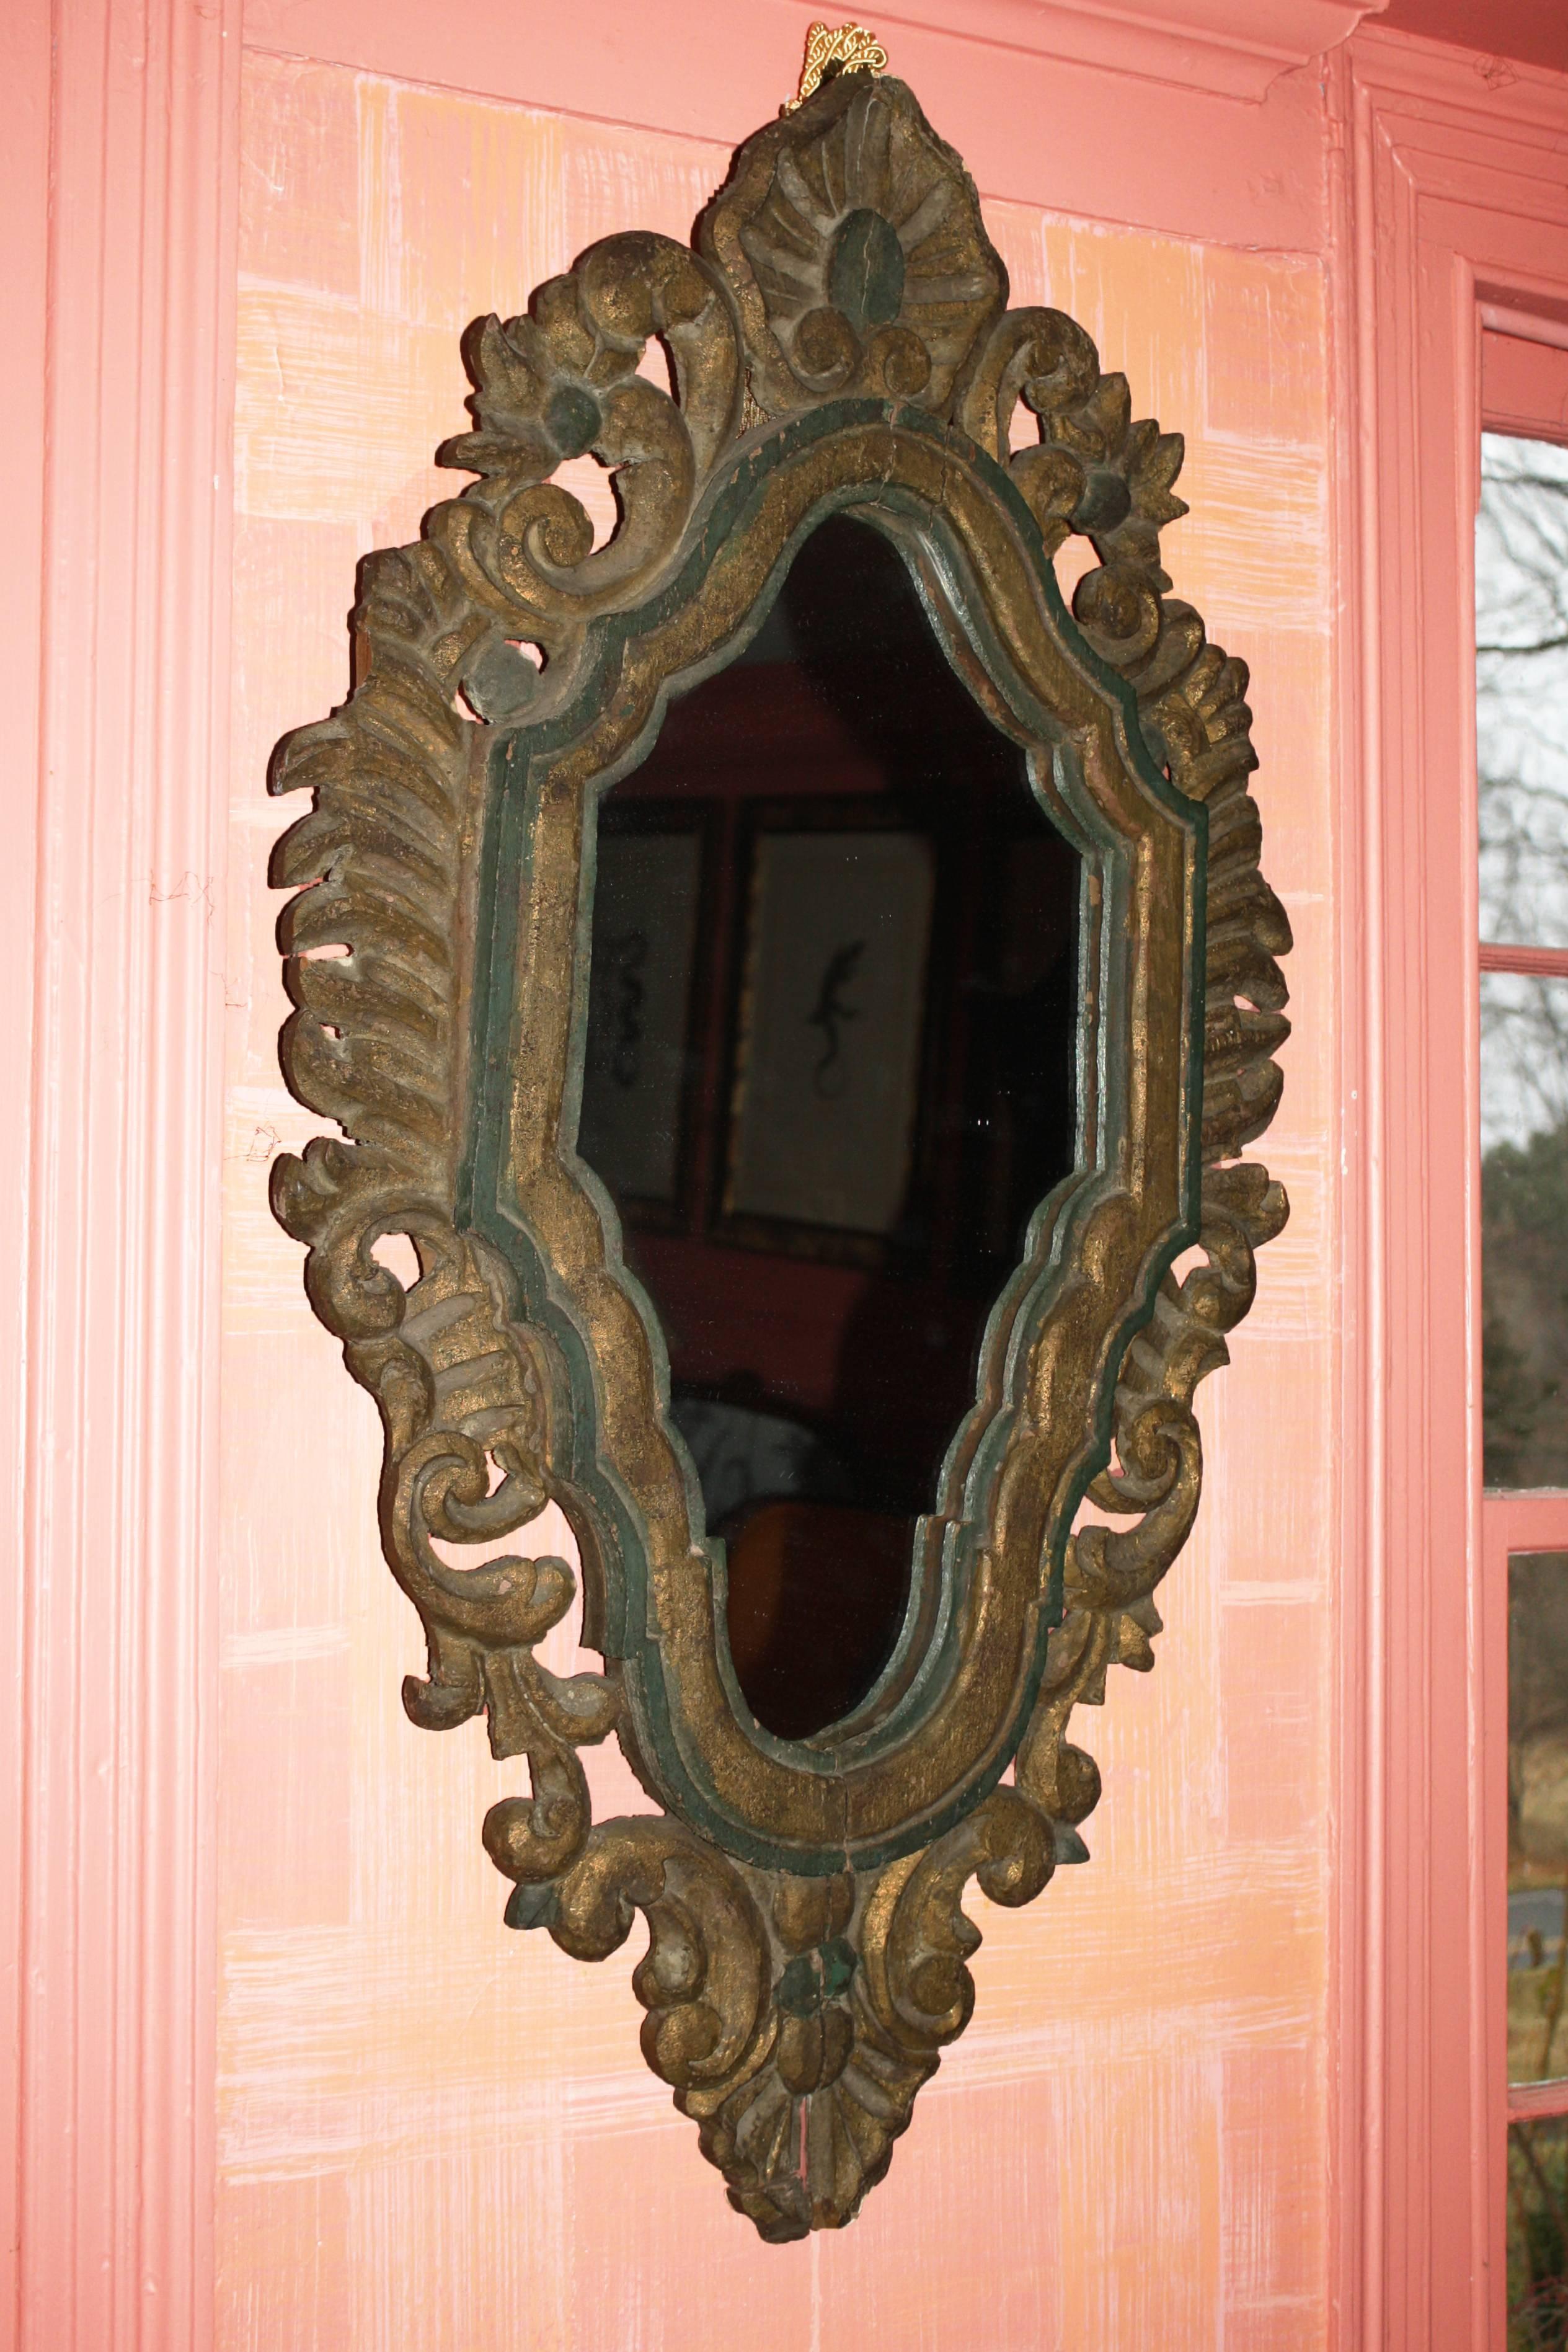 An ornately pierce-carved foliate framed elongated hexagonal mirror. The emerald green paint and water gilding appear to be original, with minimal 'in-painting' conservation. Ex: the Continental furniture collection of a National Historic Register